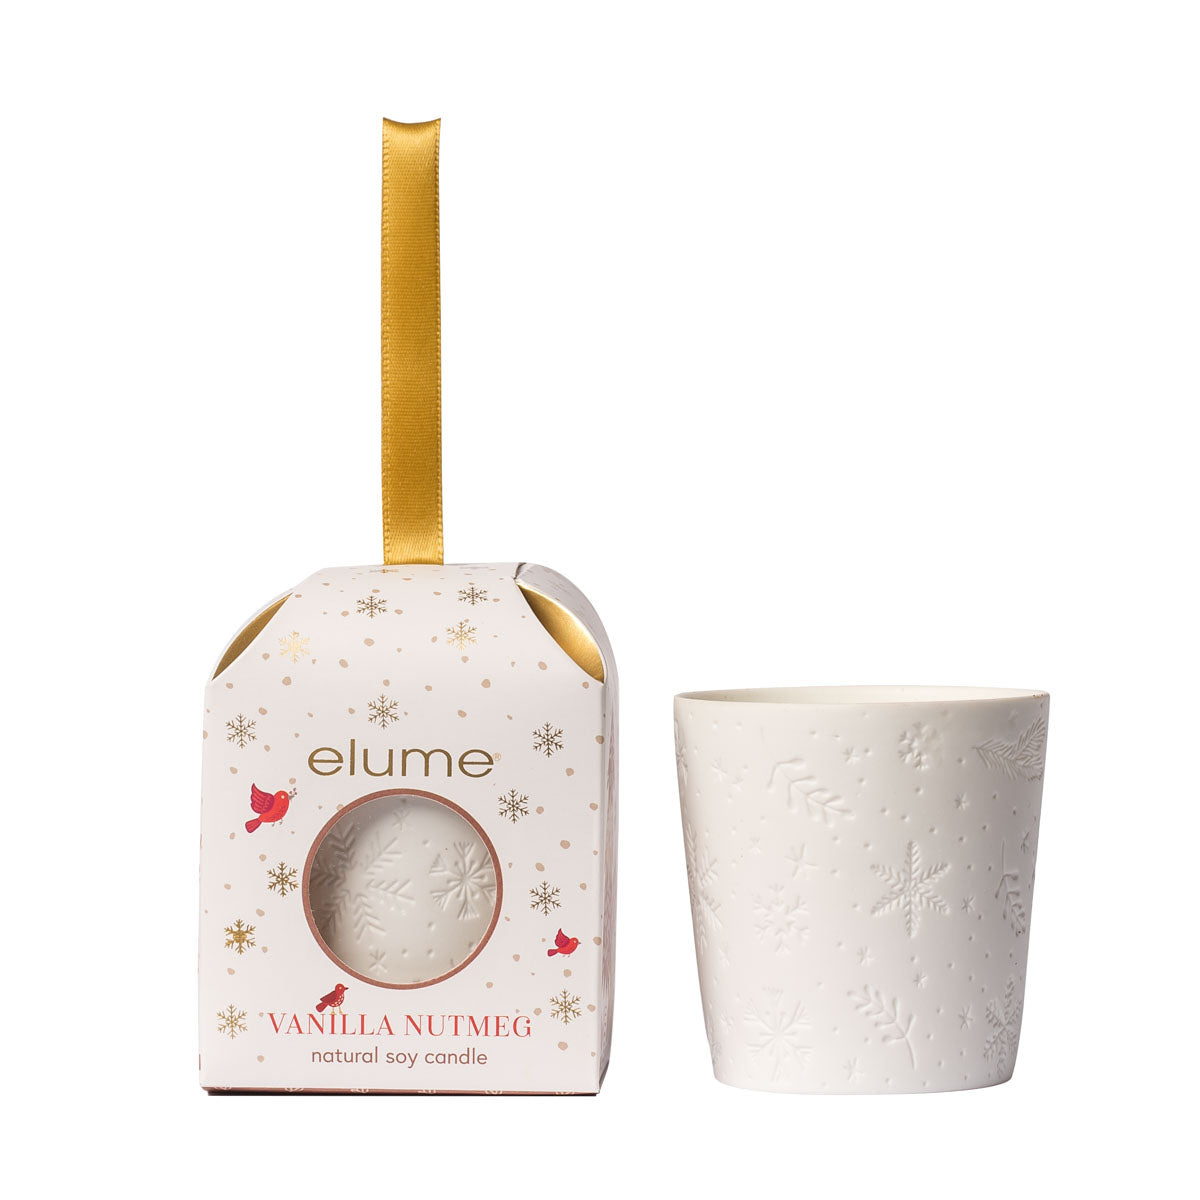 Elume Christmas Ornamental Mulberry Spice Soy Candles